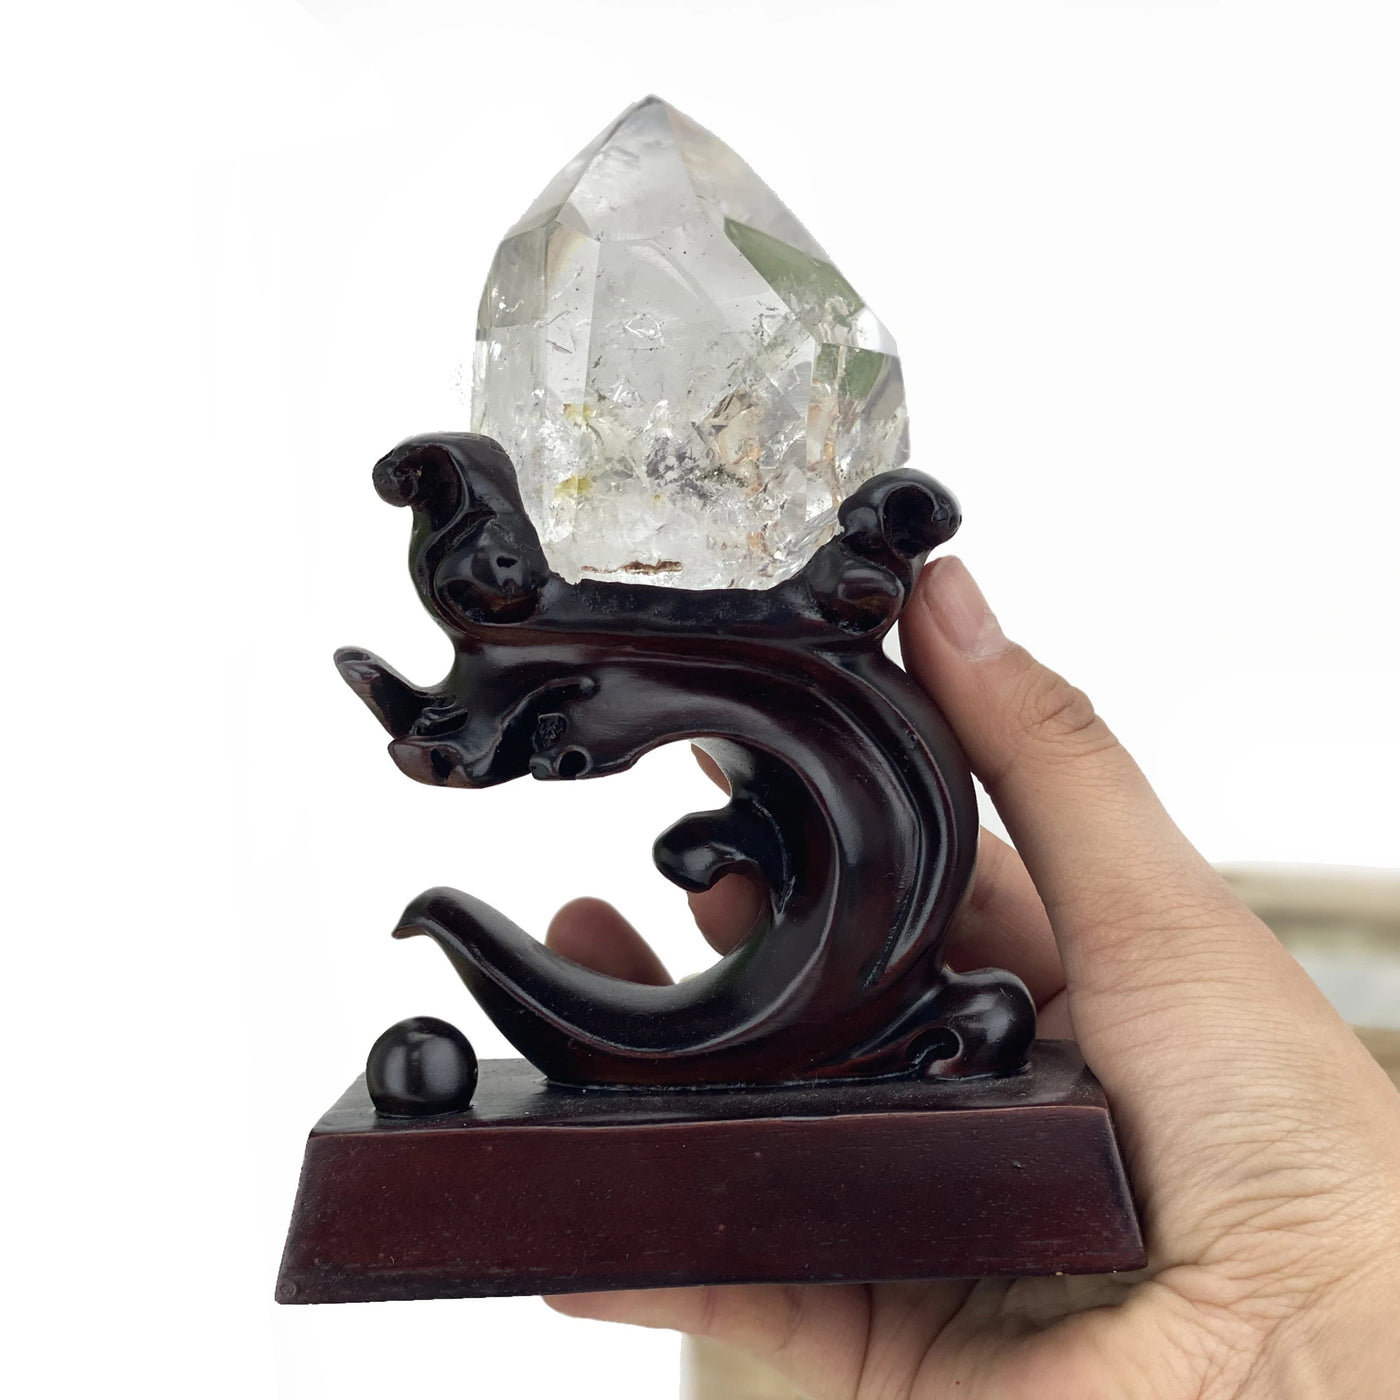 Lodolite Crystal Quartz Enhydro on Wooden Stand held in hand.